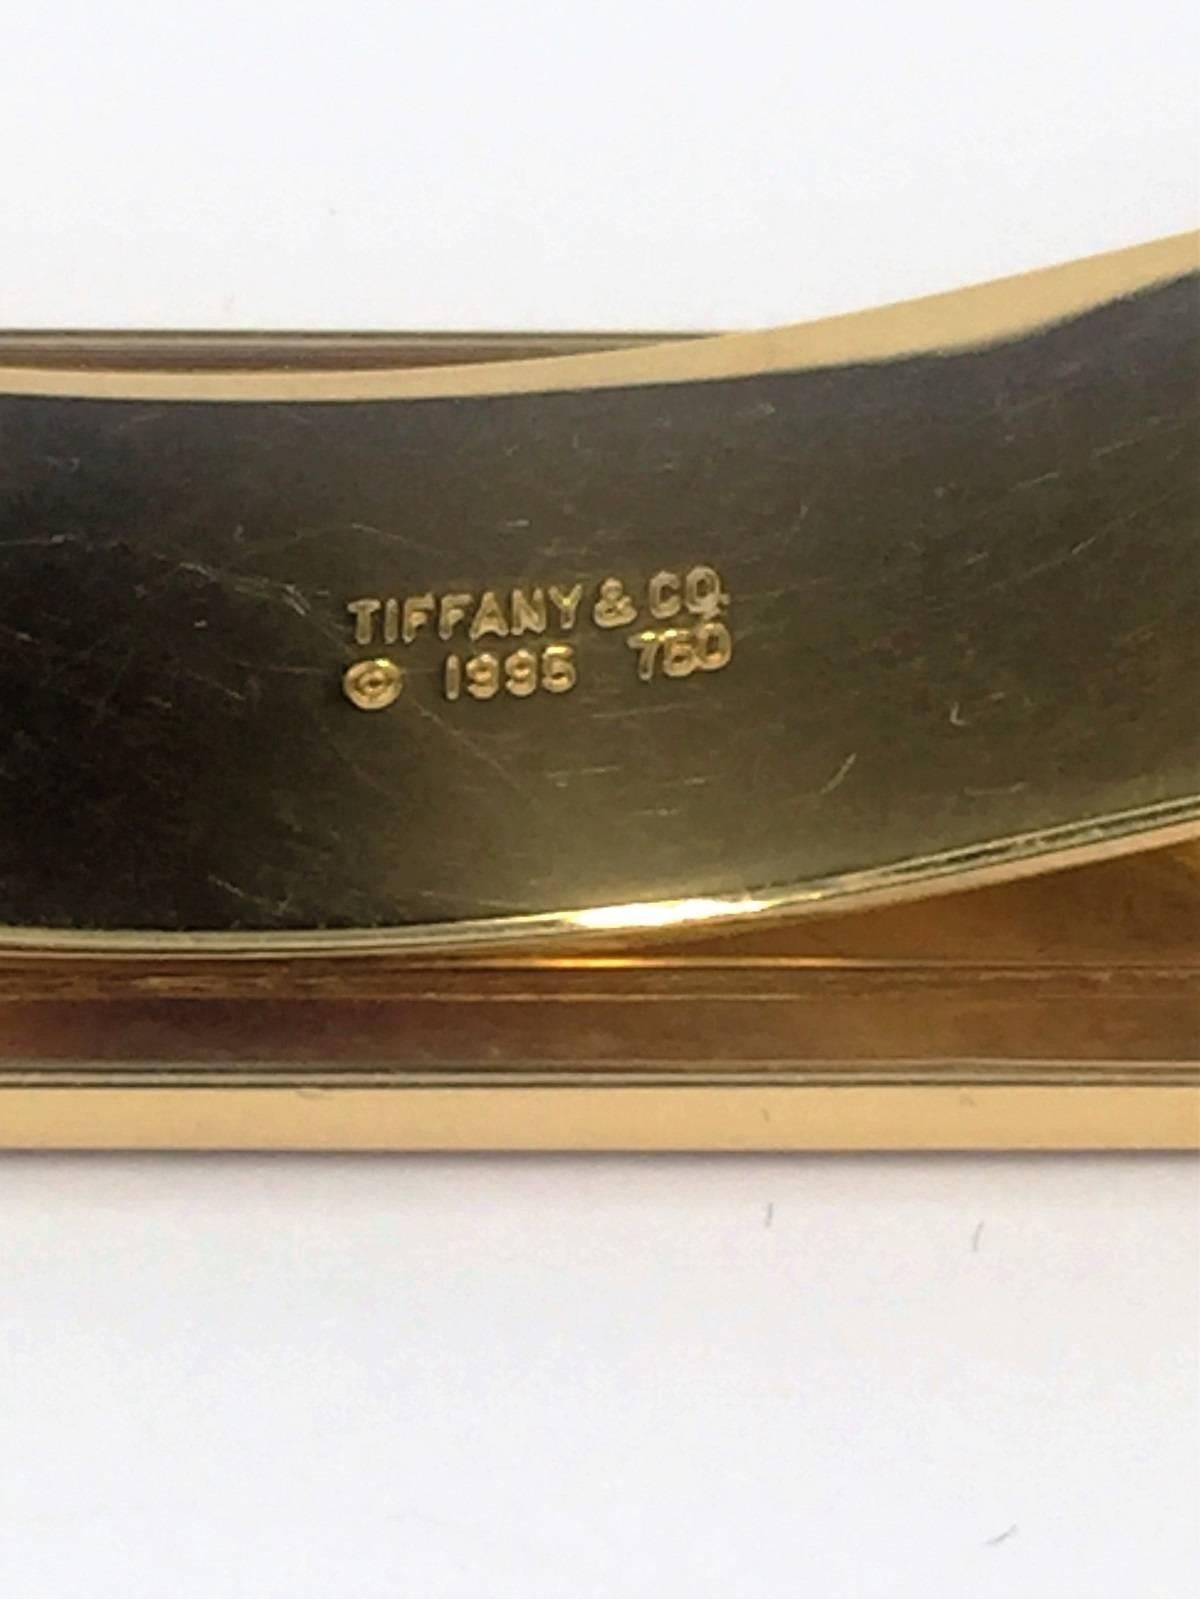 Tiffany & Co. Classic 1995 Dashing Gold Money Clip In Excellent Condition For Sale In Scottsdale, AZ